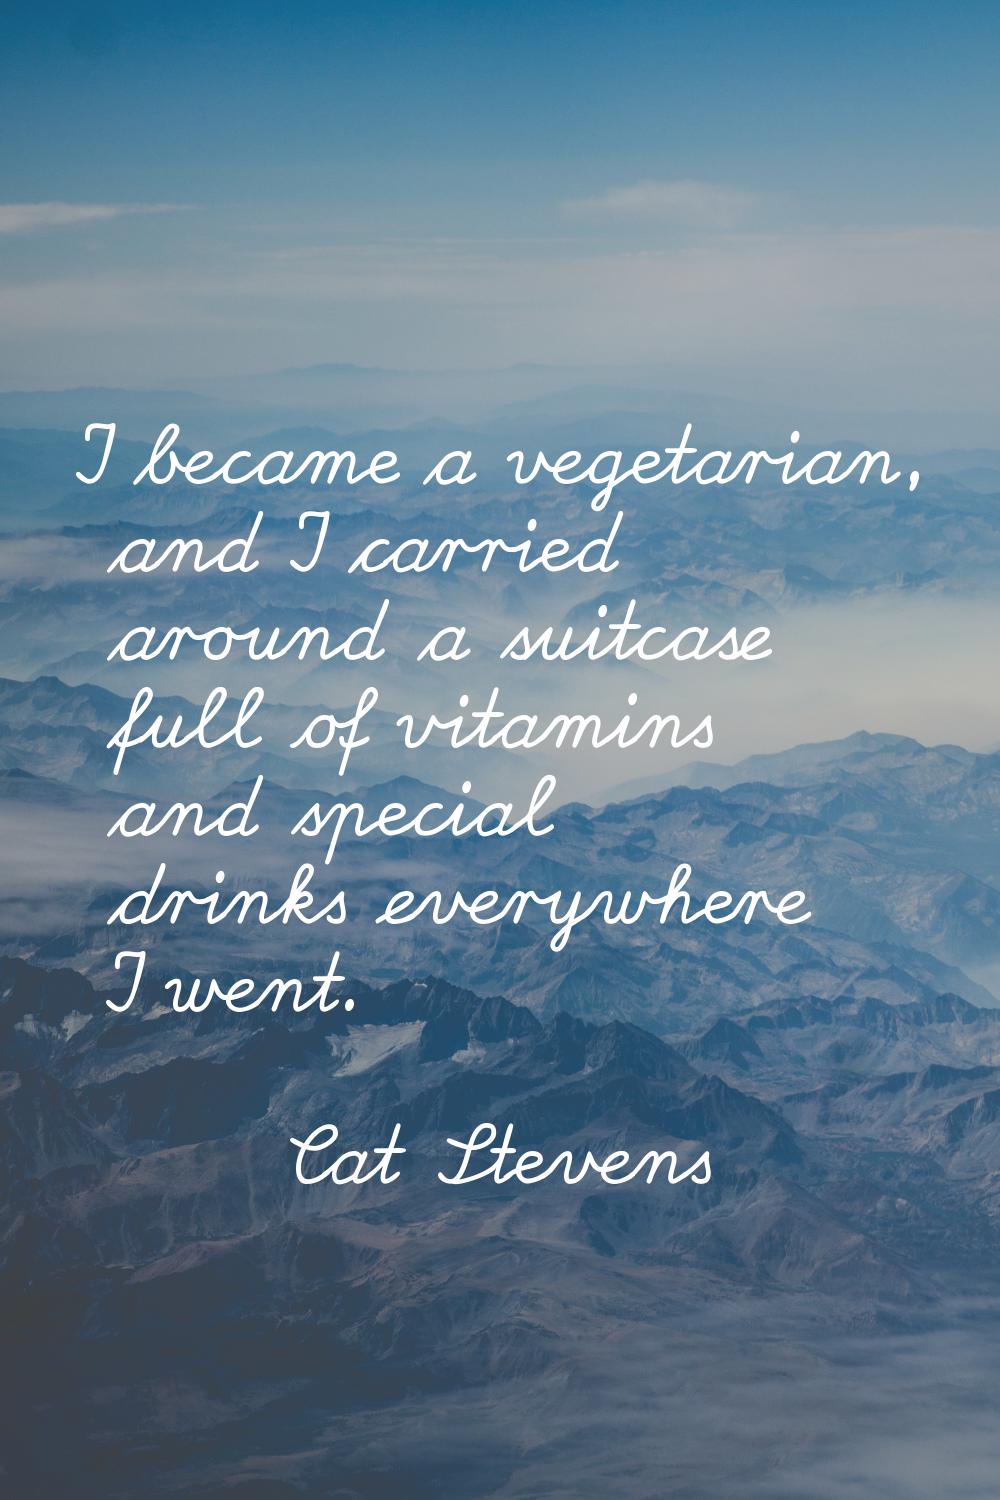 I became a vegetarian, and I carried around a suitcase full of vitamins and special drinks everywhe